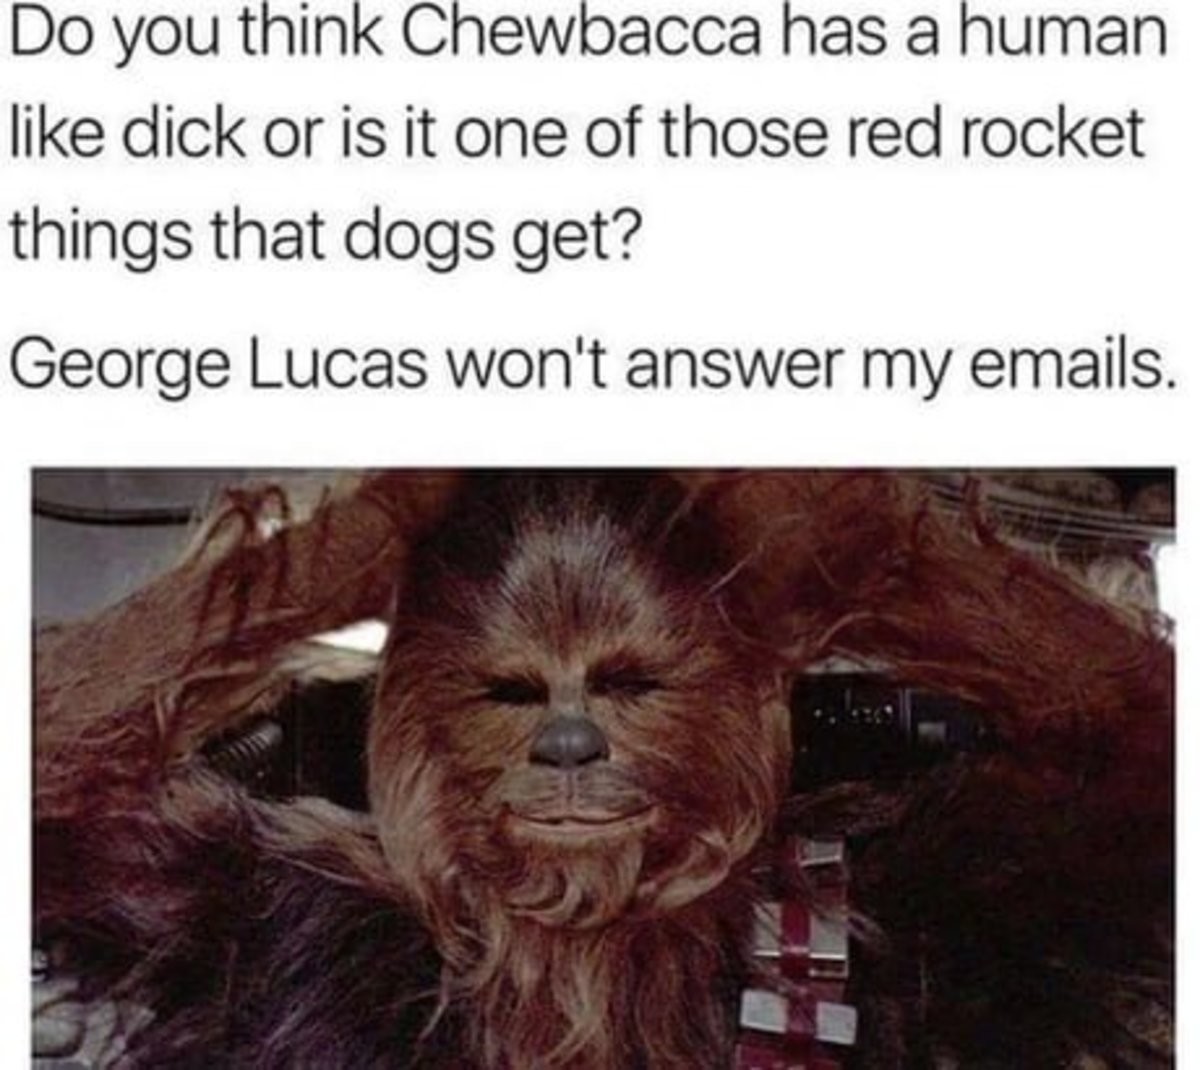 What is chewbaccas dick like